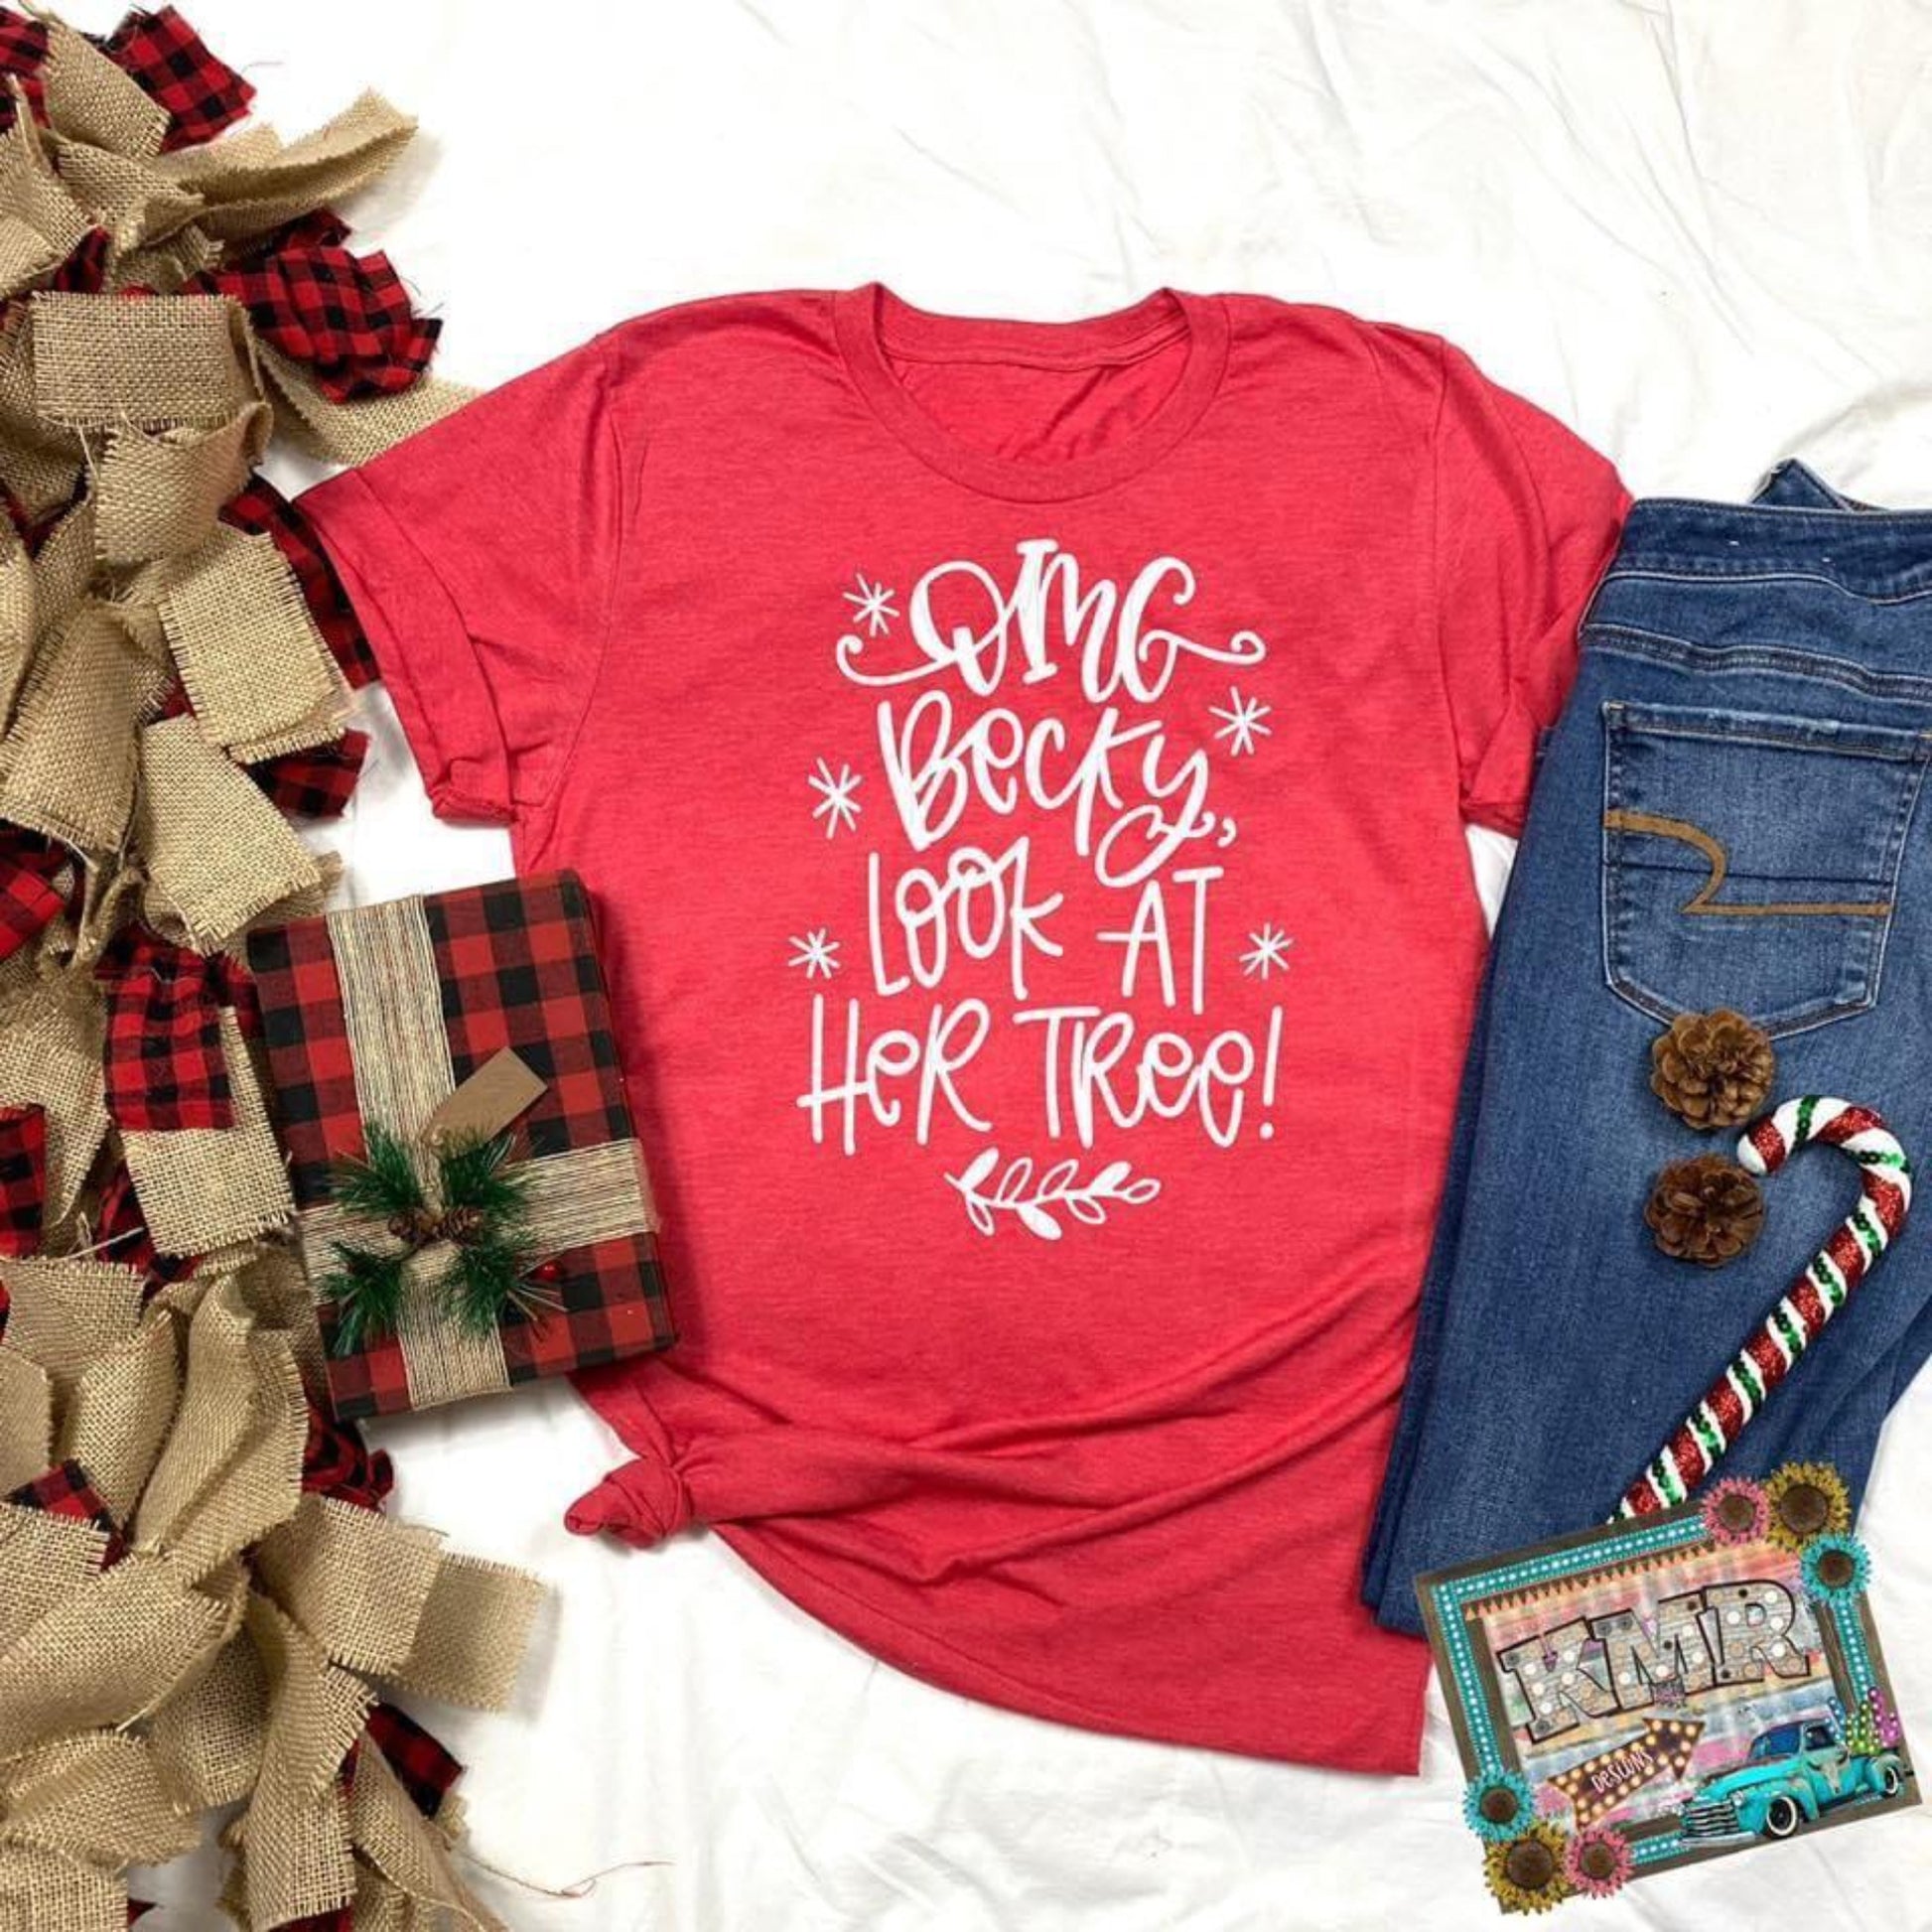 omg_becky_look_tree specialty tee holiday wear casual shirt comfortable tops